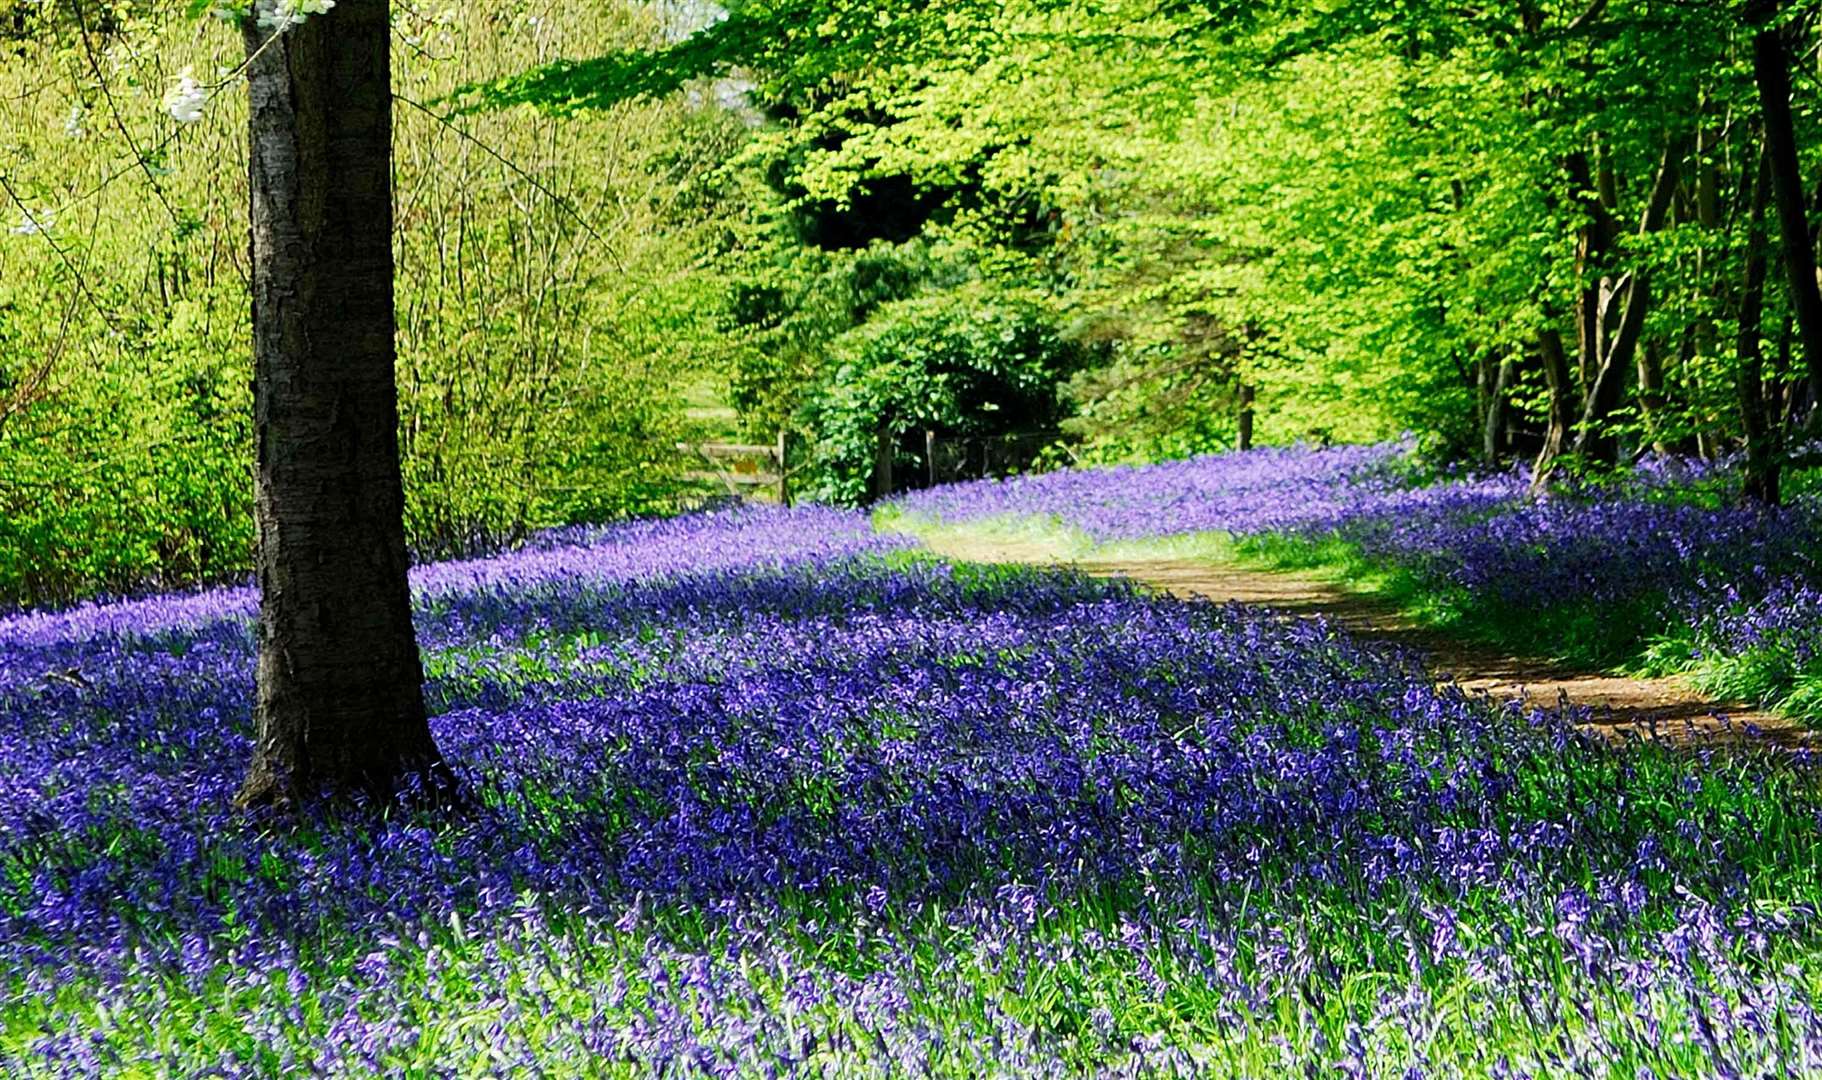 The eye-catching Bluebell Spectacular returns to Hole Park this spring. Picture: Supplied by Pennington PR